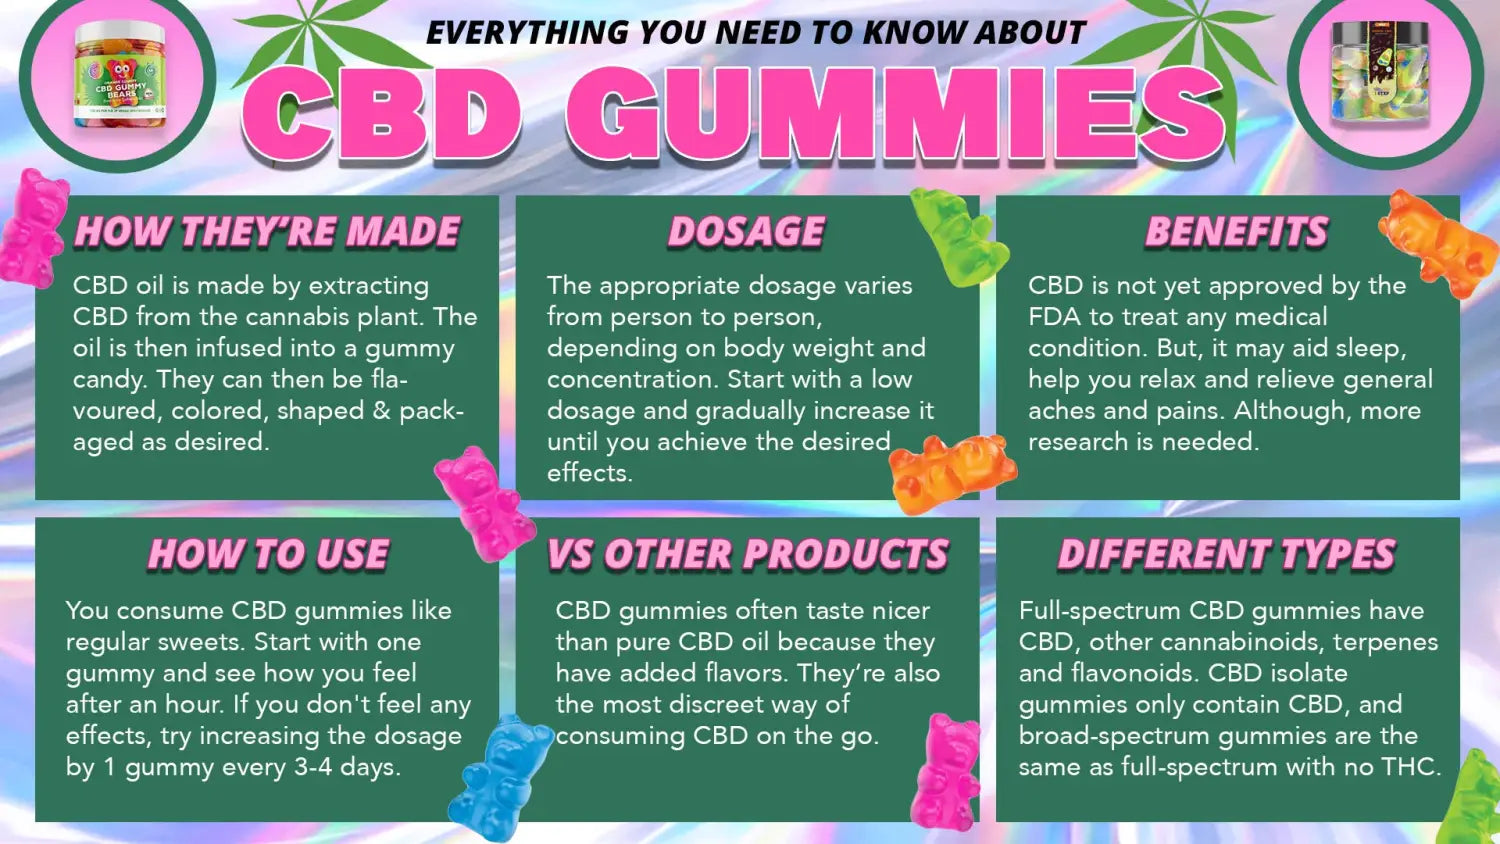 What CBD Gummies Should I Start With?